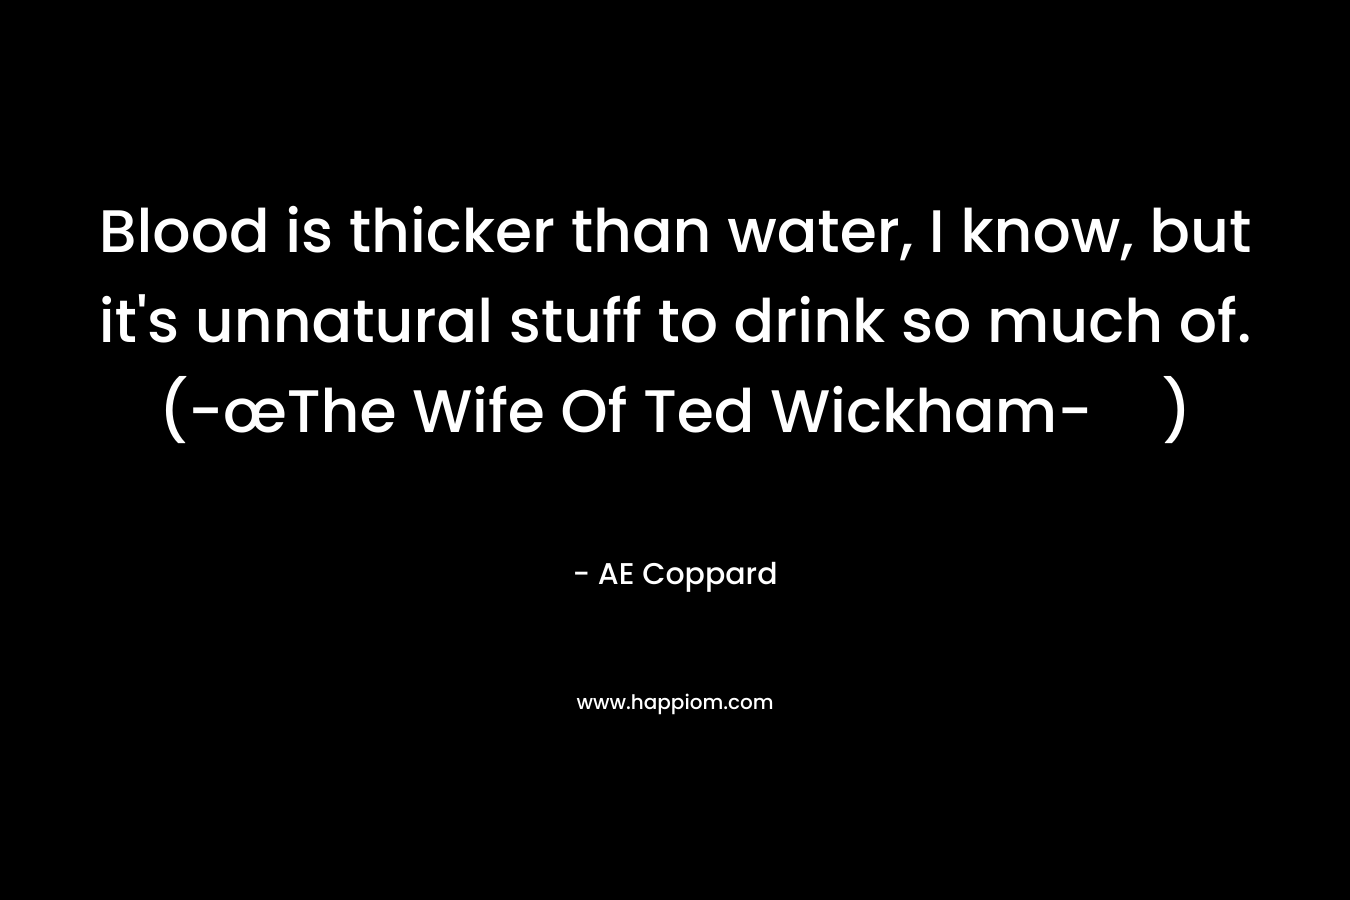 Blood is thicker than water, I know, but it’s unnatural stuff to drink so much of. (-œThe Wife Of Ted Wickham-) – AE Coppard